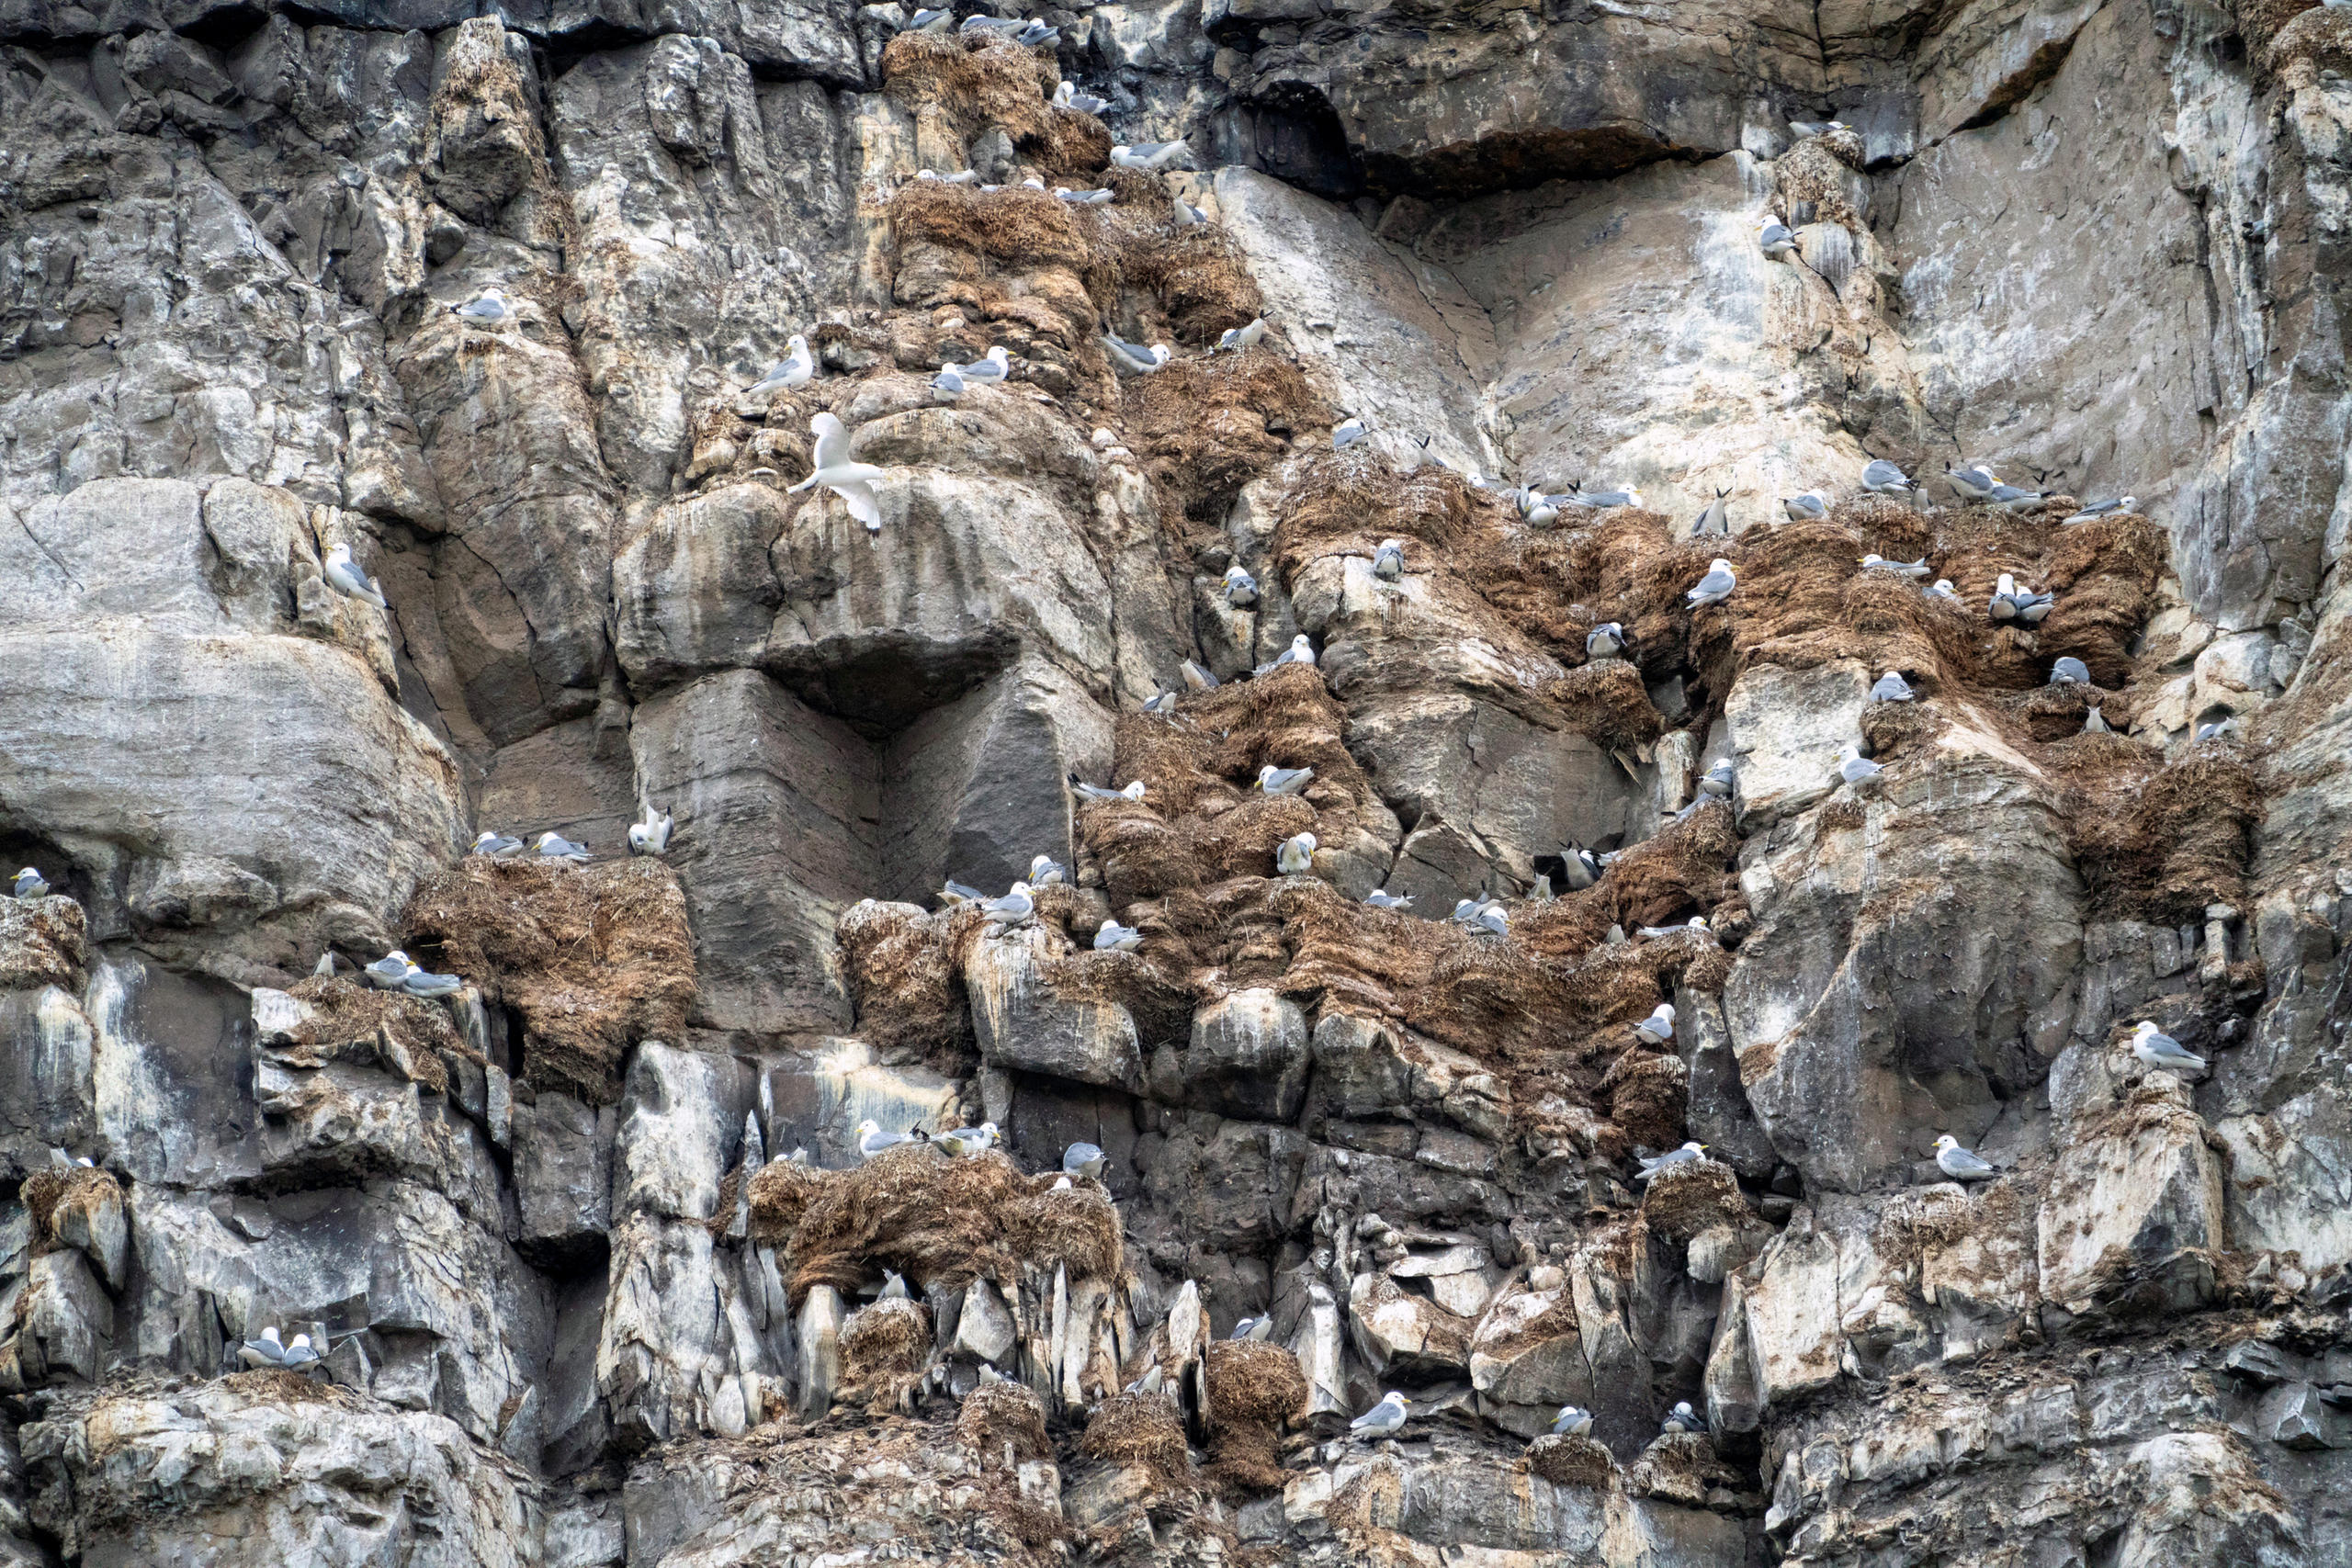 A typical bird cliff with nesting birds